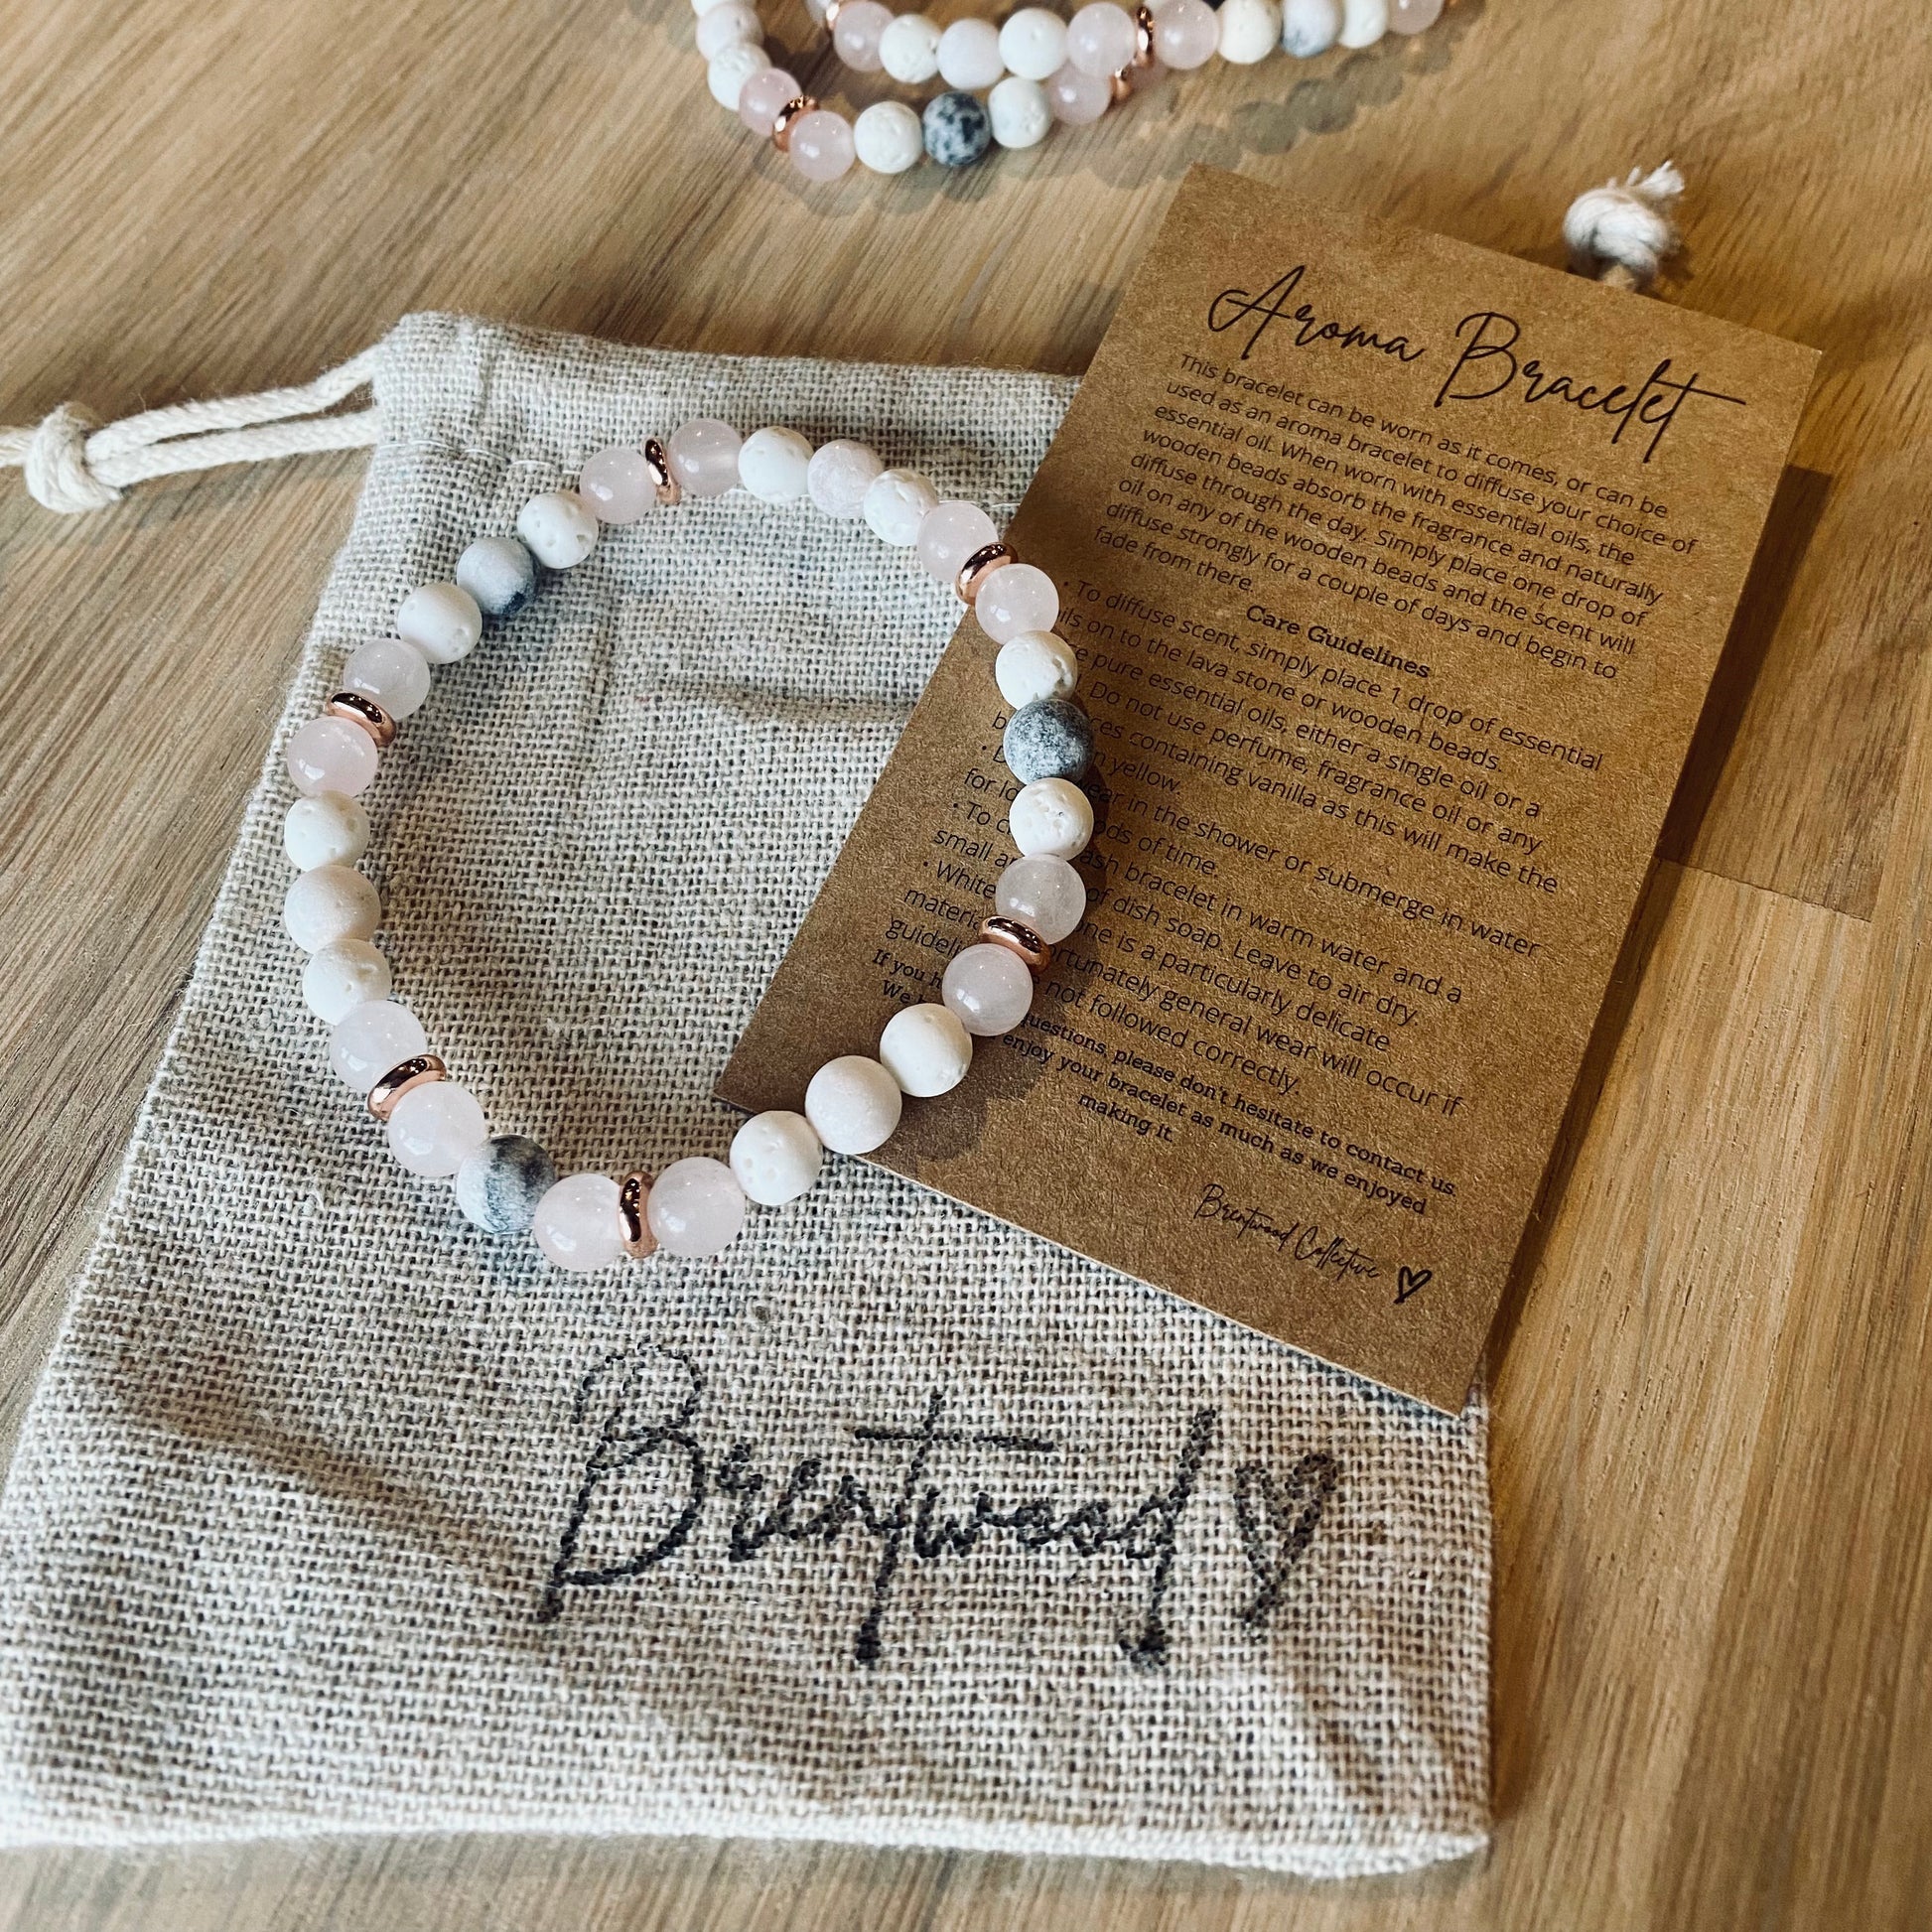 Pink Zebra Jasper Aroma Bracelet - 6mm beaded diffuser bracelet made from a pattern of pink zebra jasper, rose quartz, white lava stone & rose gold disc embellishments. Laid on cloth pouch/drawstring bag stamped with “Brentwood” and an aroma bracelet information and care card on kraft brown card.